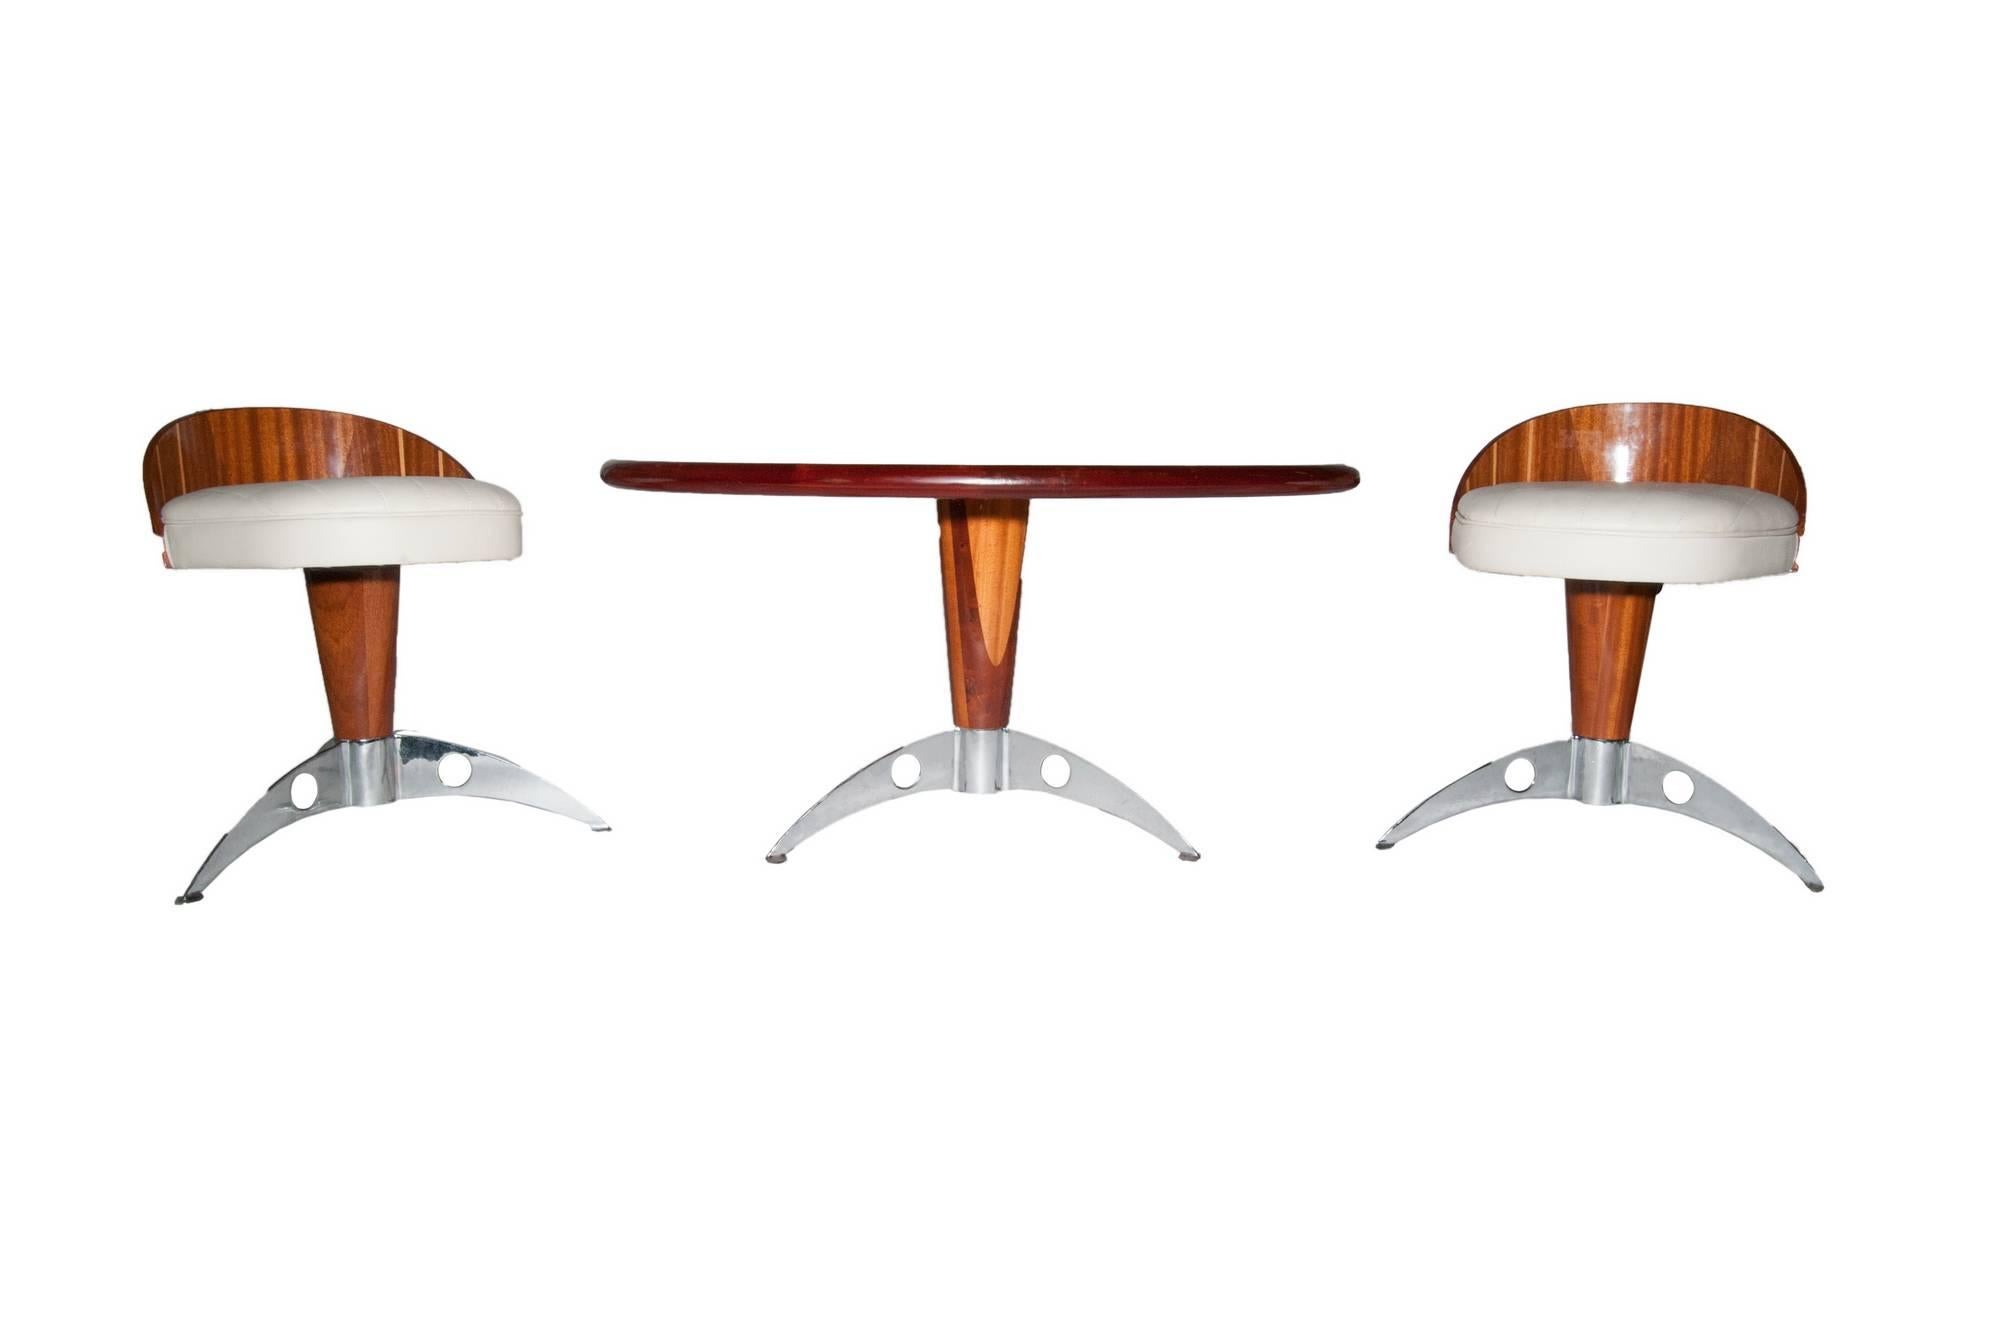 International Style Triconfort Rivage Nautical Table and Chairs, Three Pieces